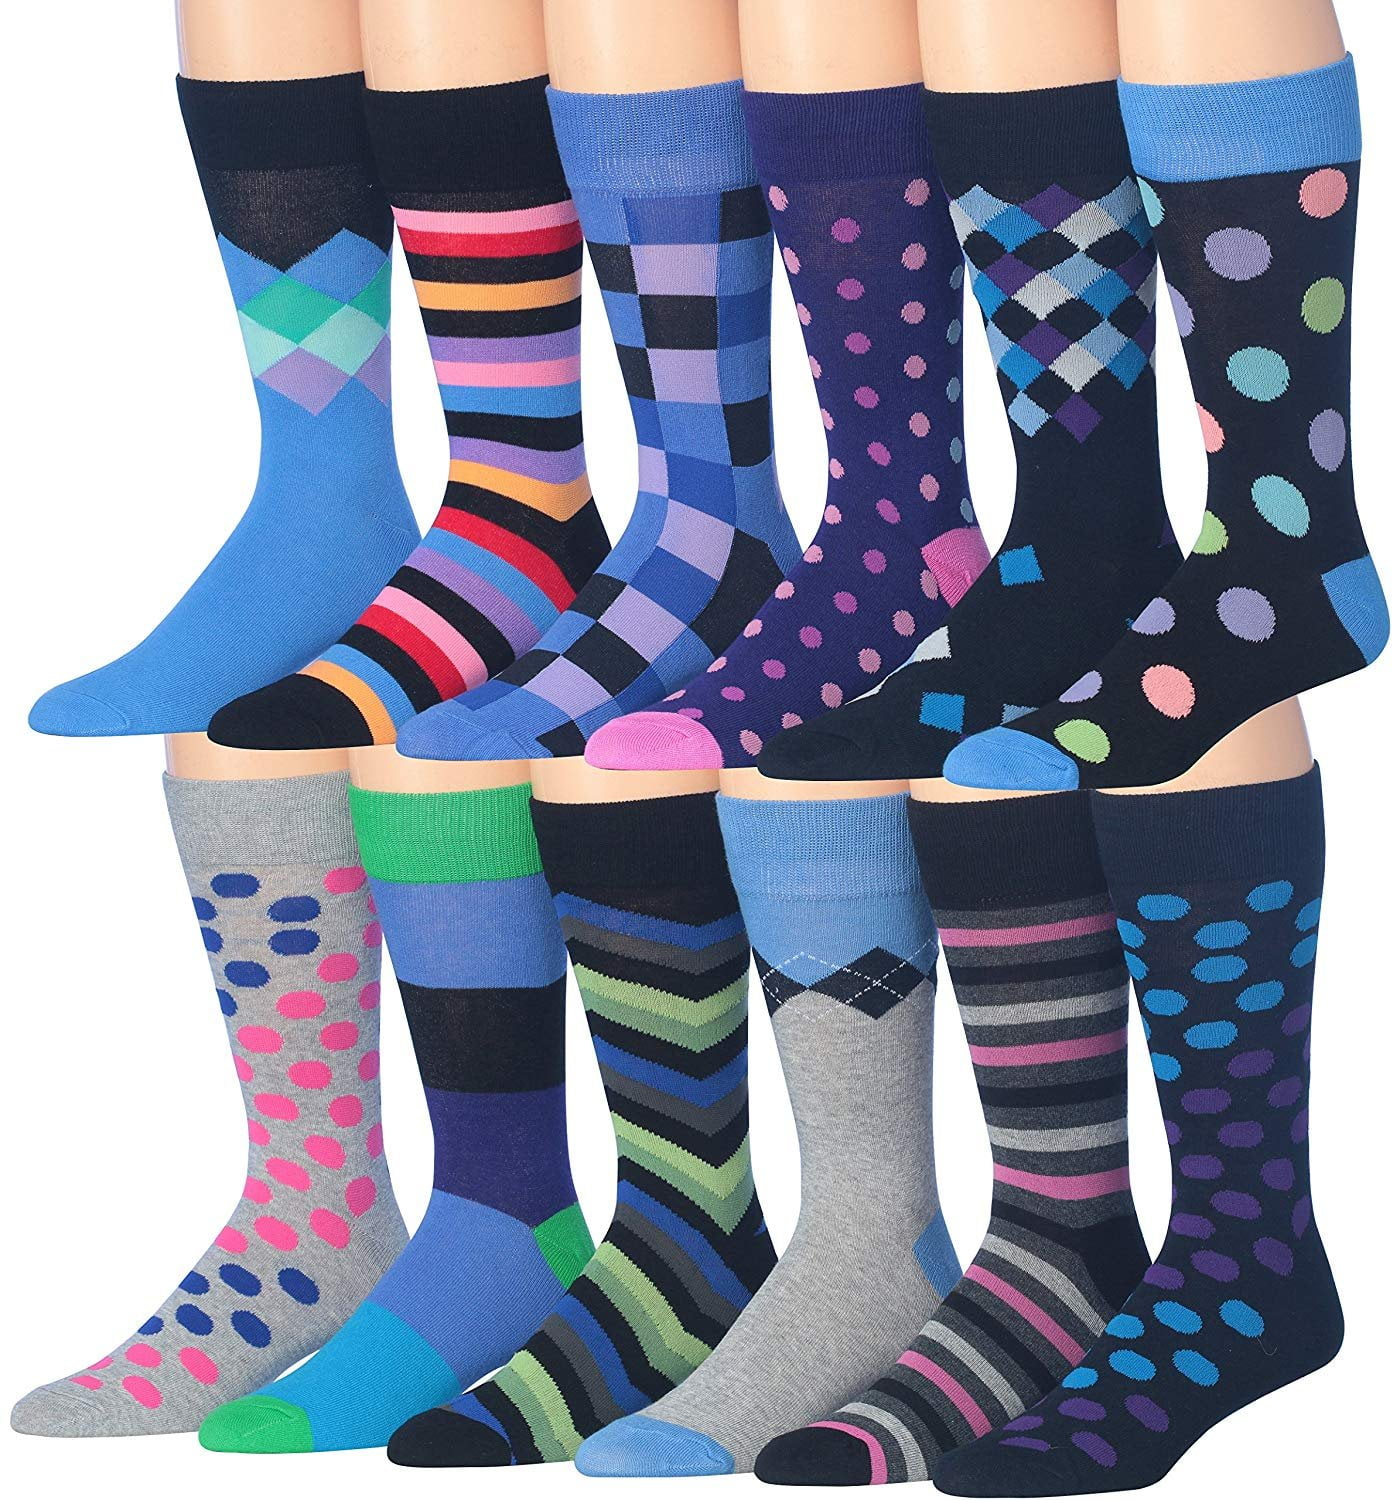 Details about   Crew Socks Mens Mid Crew Socks  Warm Christmas Gift Bed Socks Casual 5 Pairs/Lot 